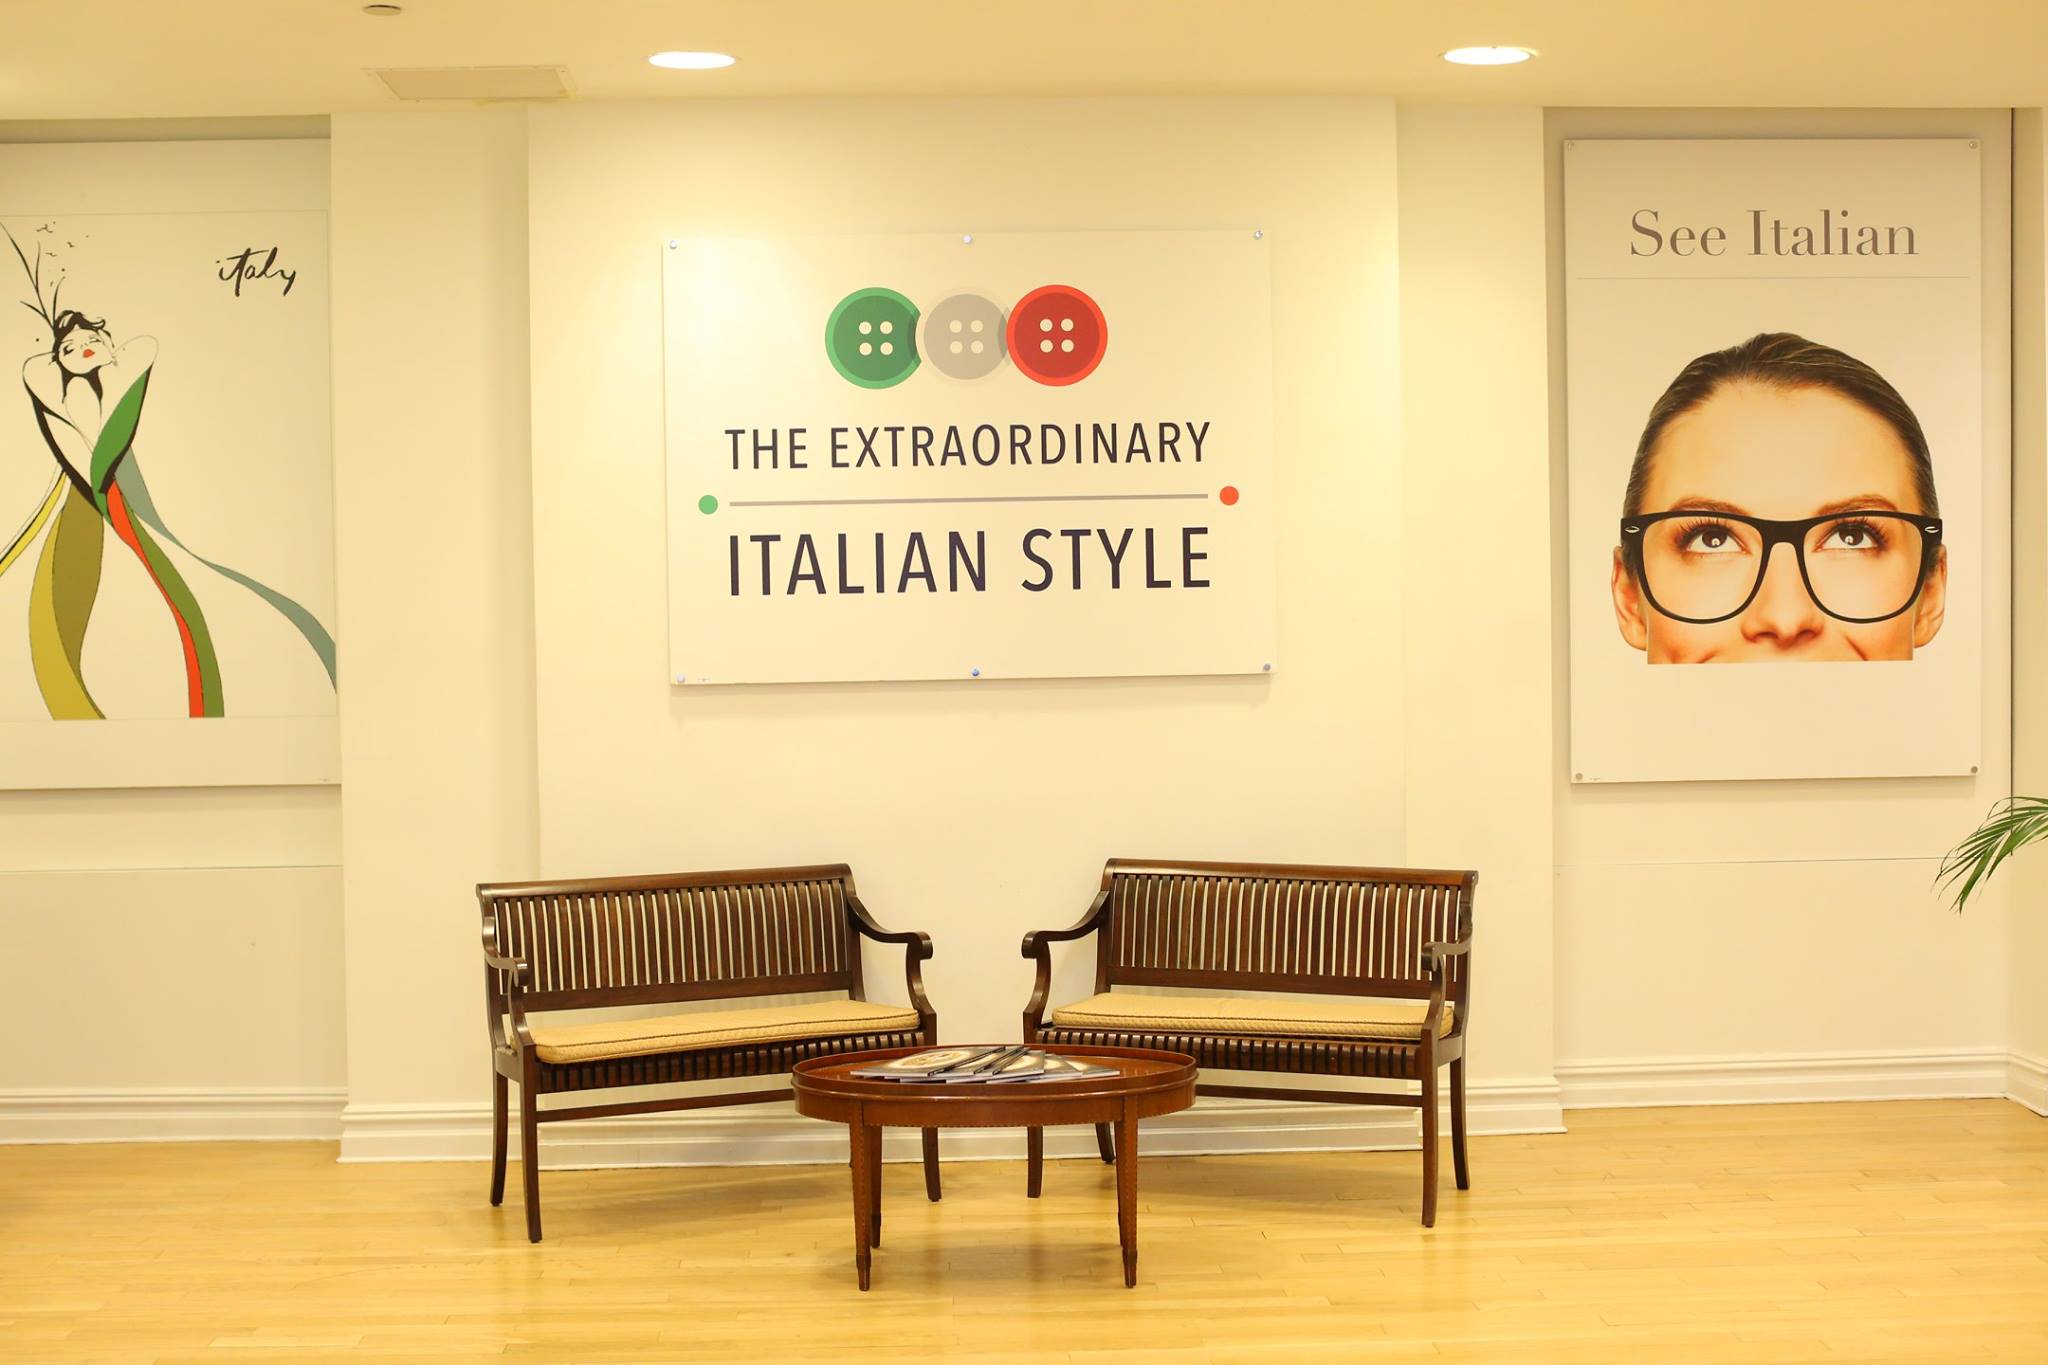 All about Italy meets Italian fashion in New York